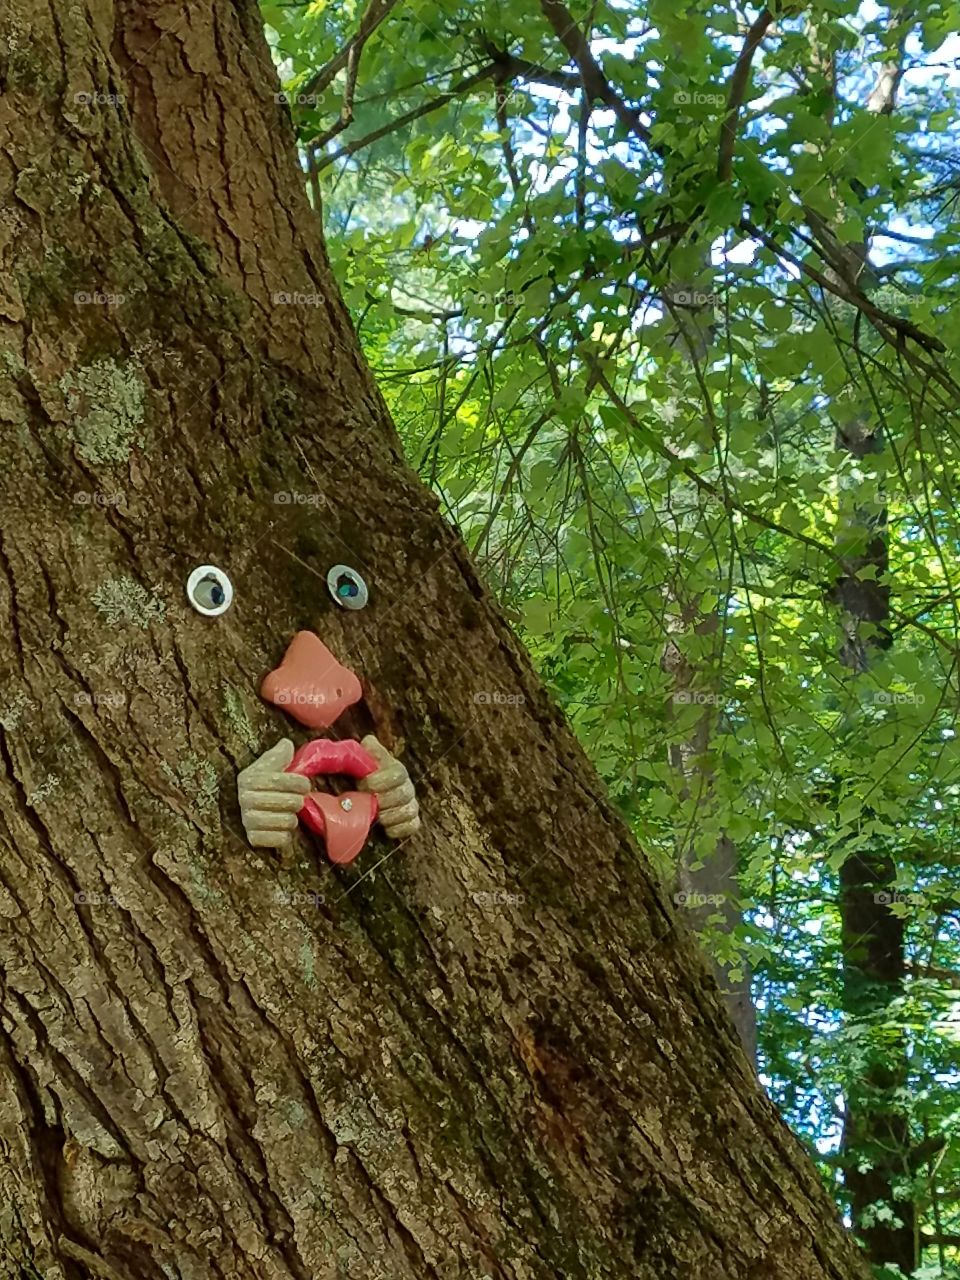 Funny face on shade tree. Lots of branches with green leaves in background.